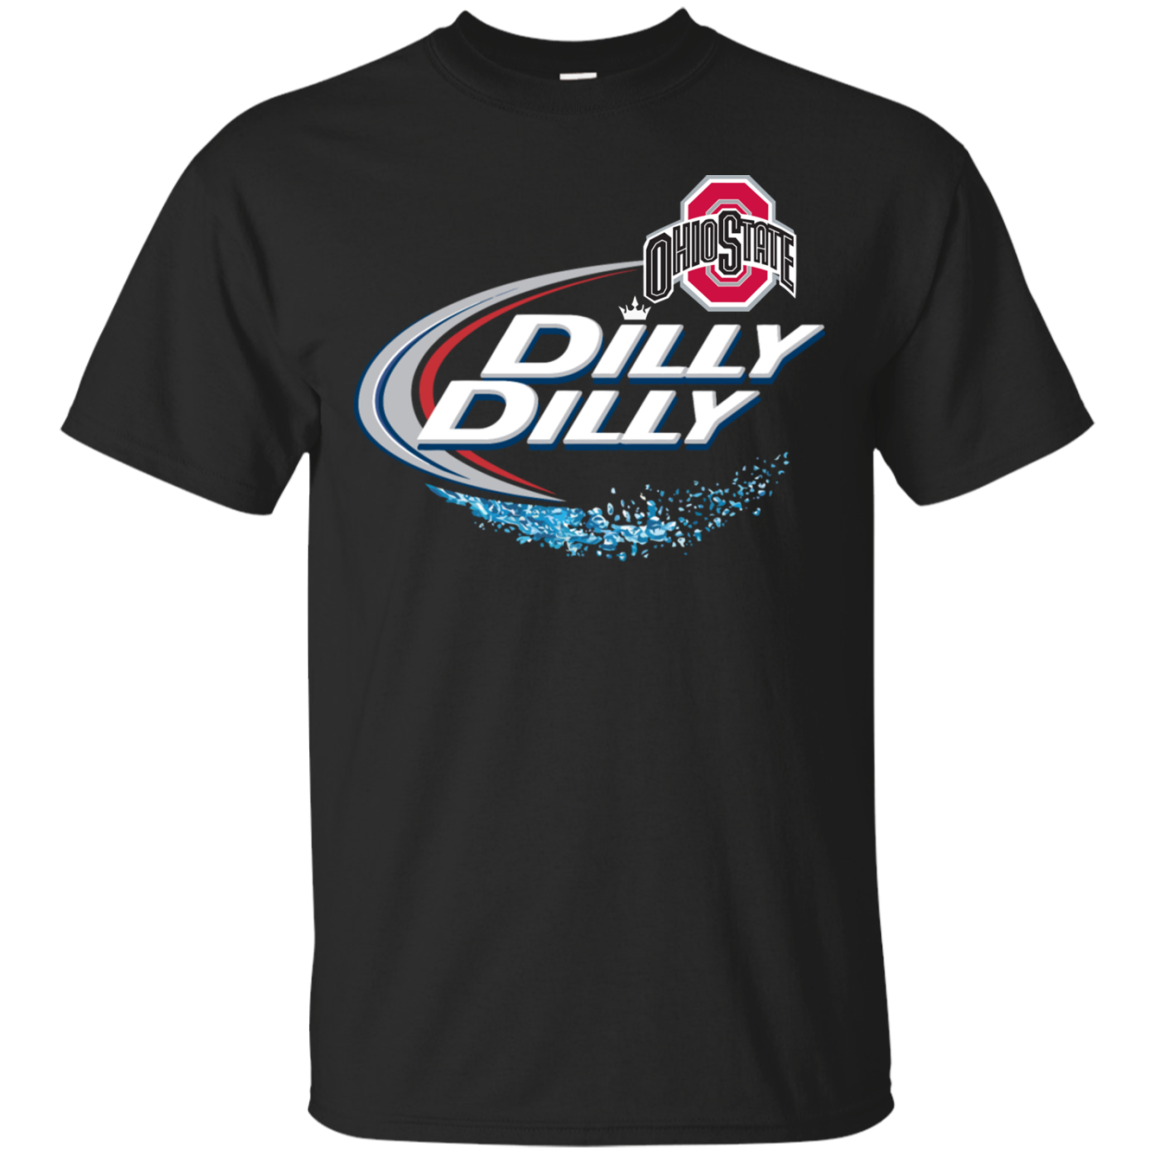 Ohio State Buckeyes Dilly Dilly Bud Light Tshirt Nfl Football Fans Premium Gift